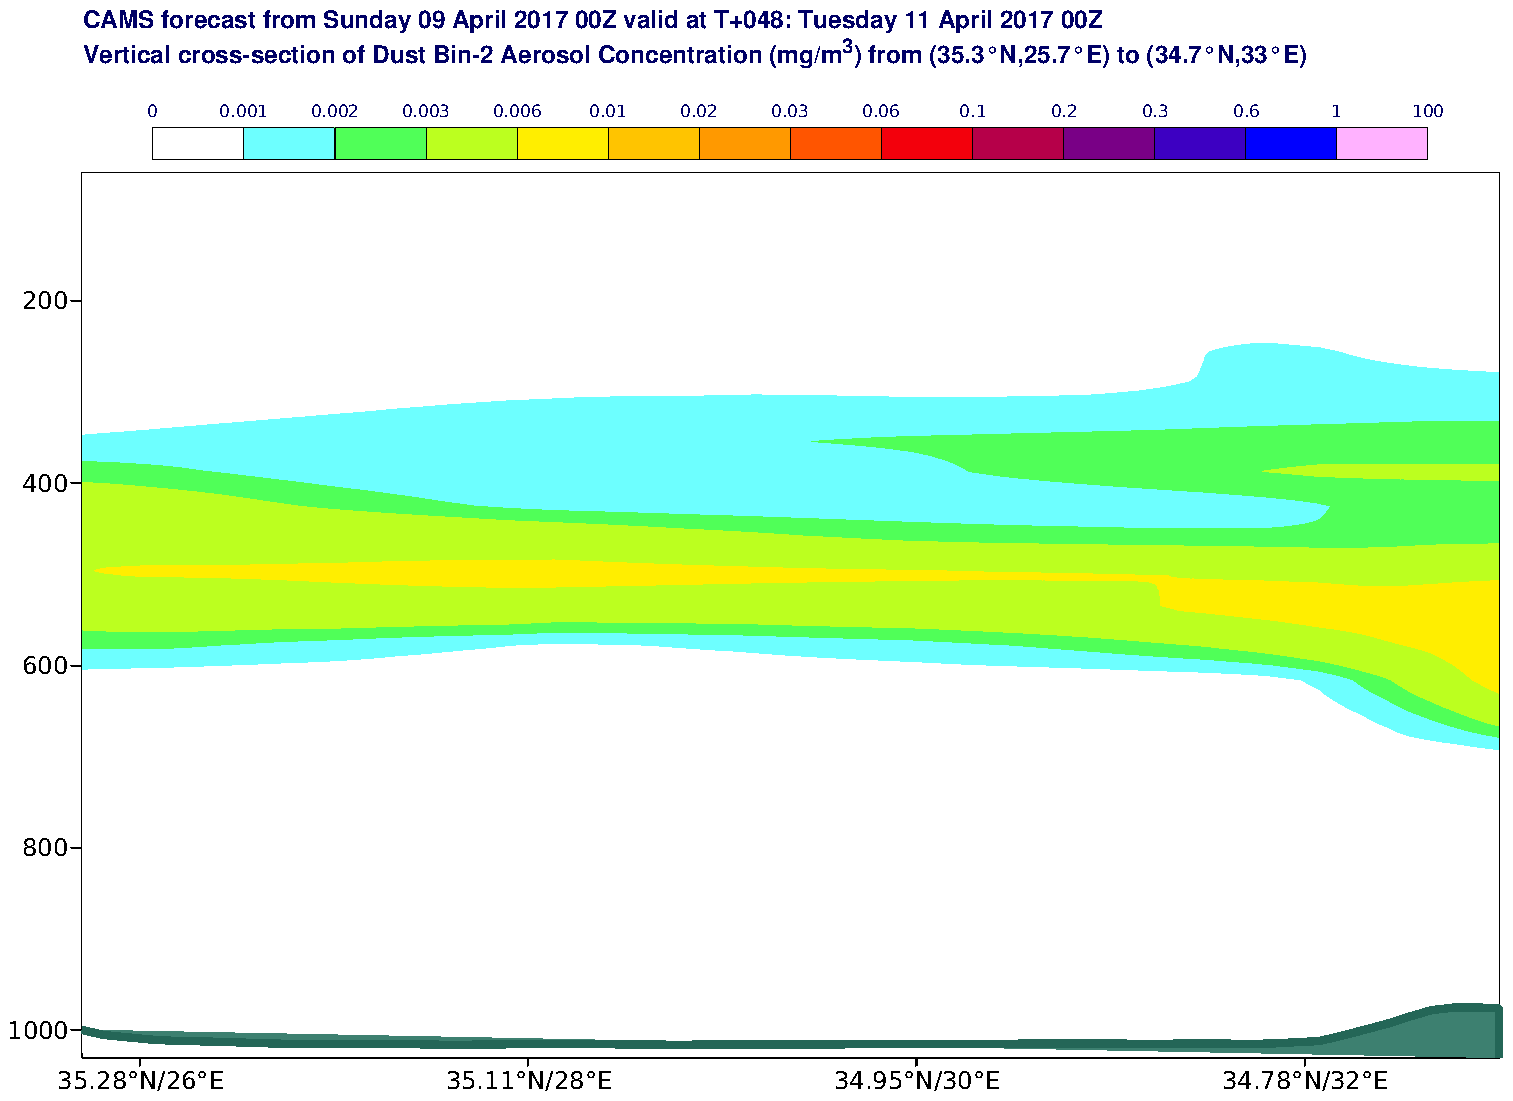 Vertical cross-section of Dust Bin-2 Aerosol Concentration (mg/m3) valid at T48 - 2017-04-11 00:00